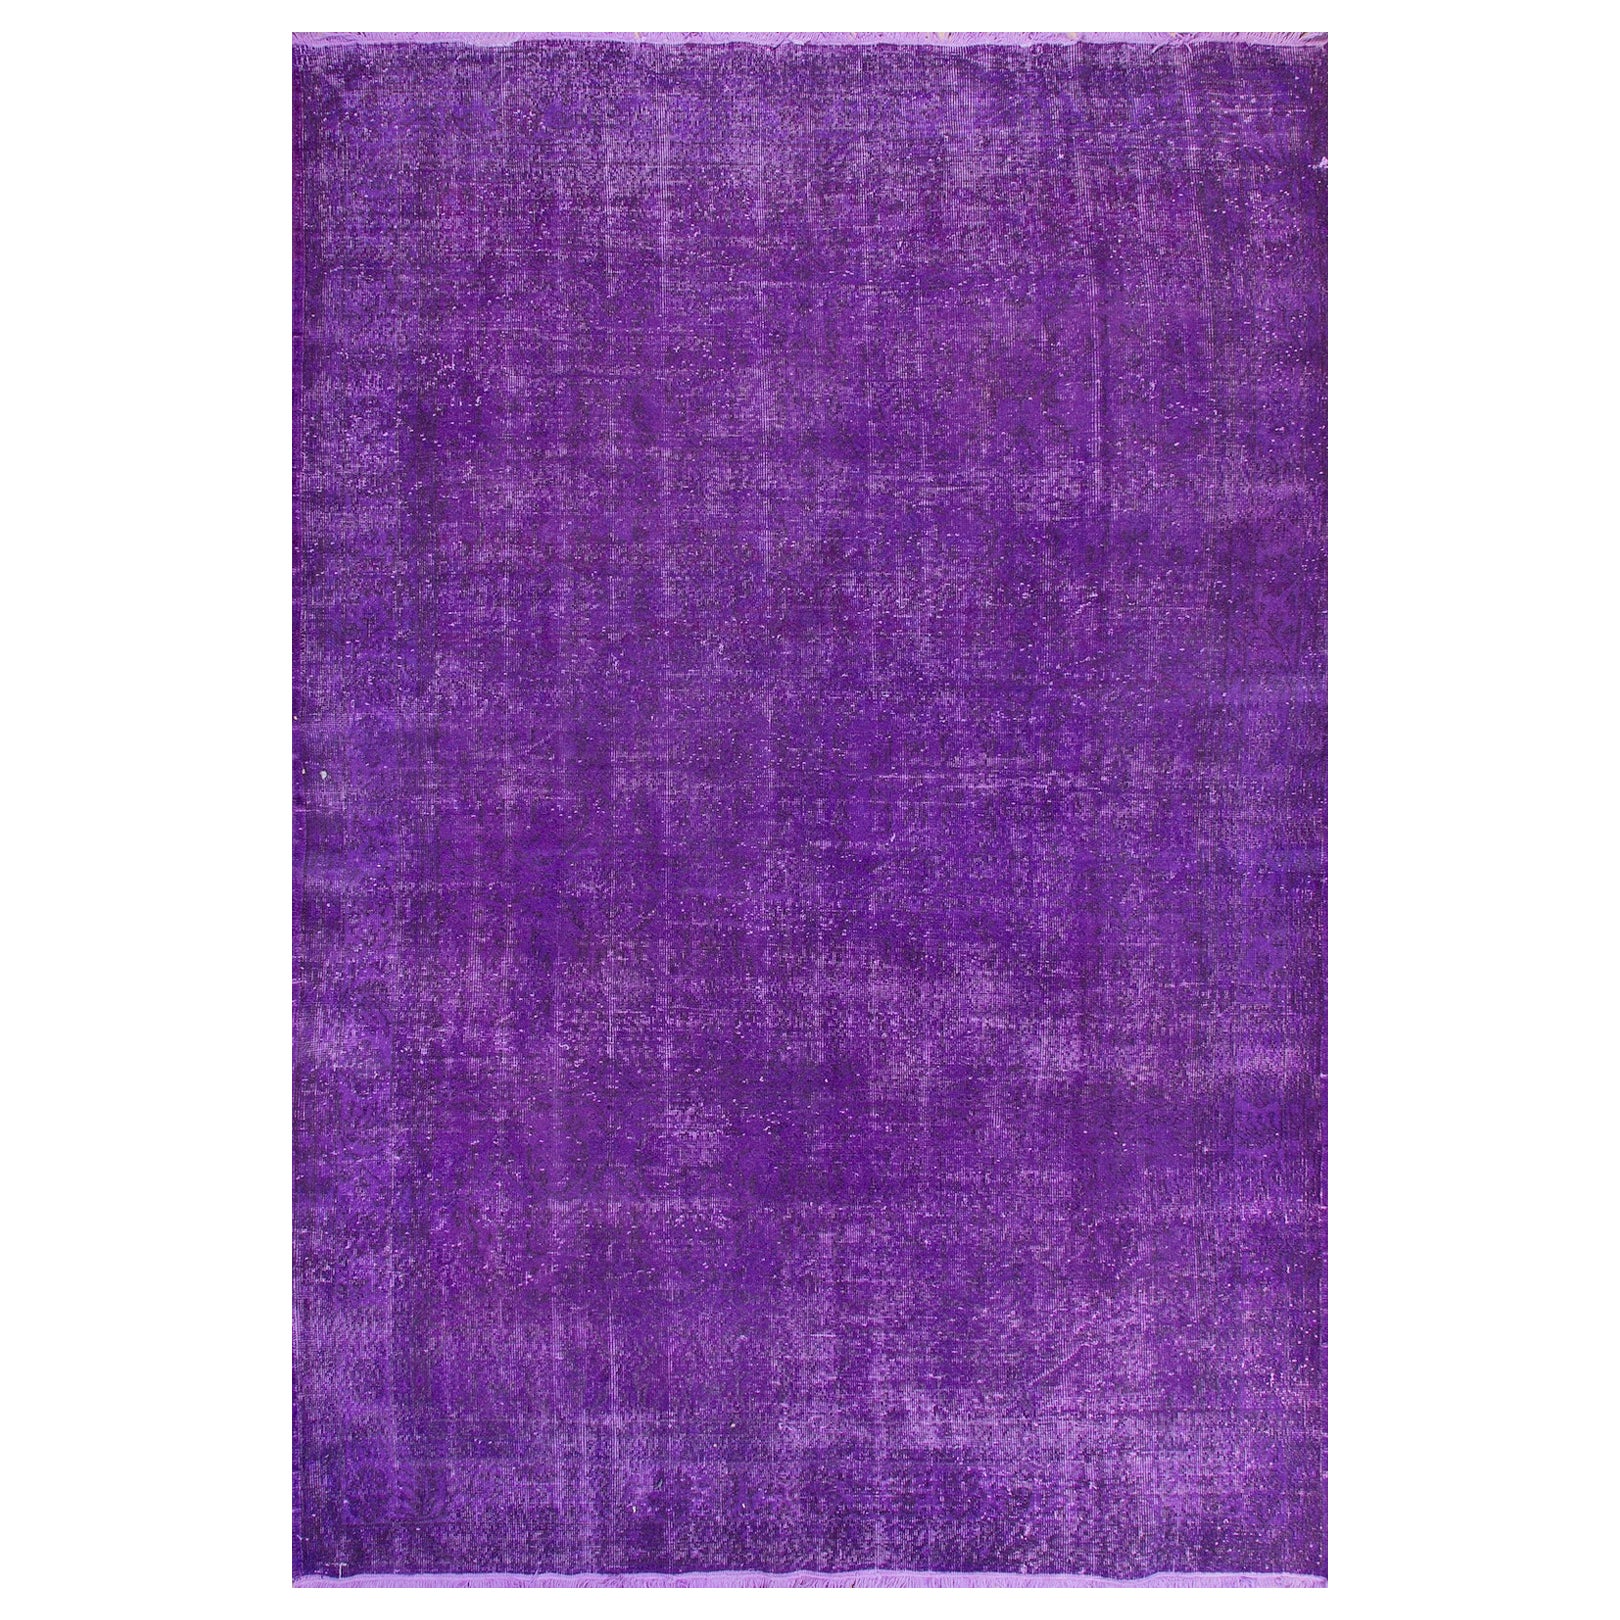 6.8x11 Ft Vintage Handmade Wool Rug in Solid Purple for Modern Office and Home For Sale